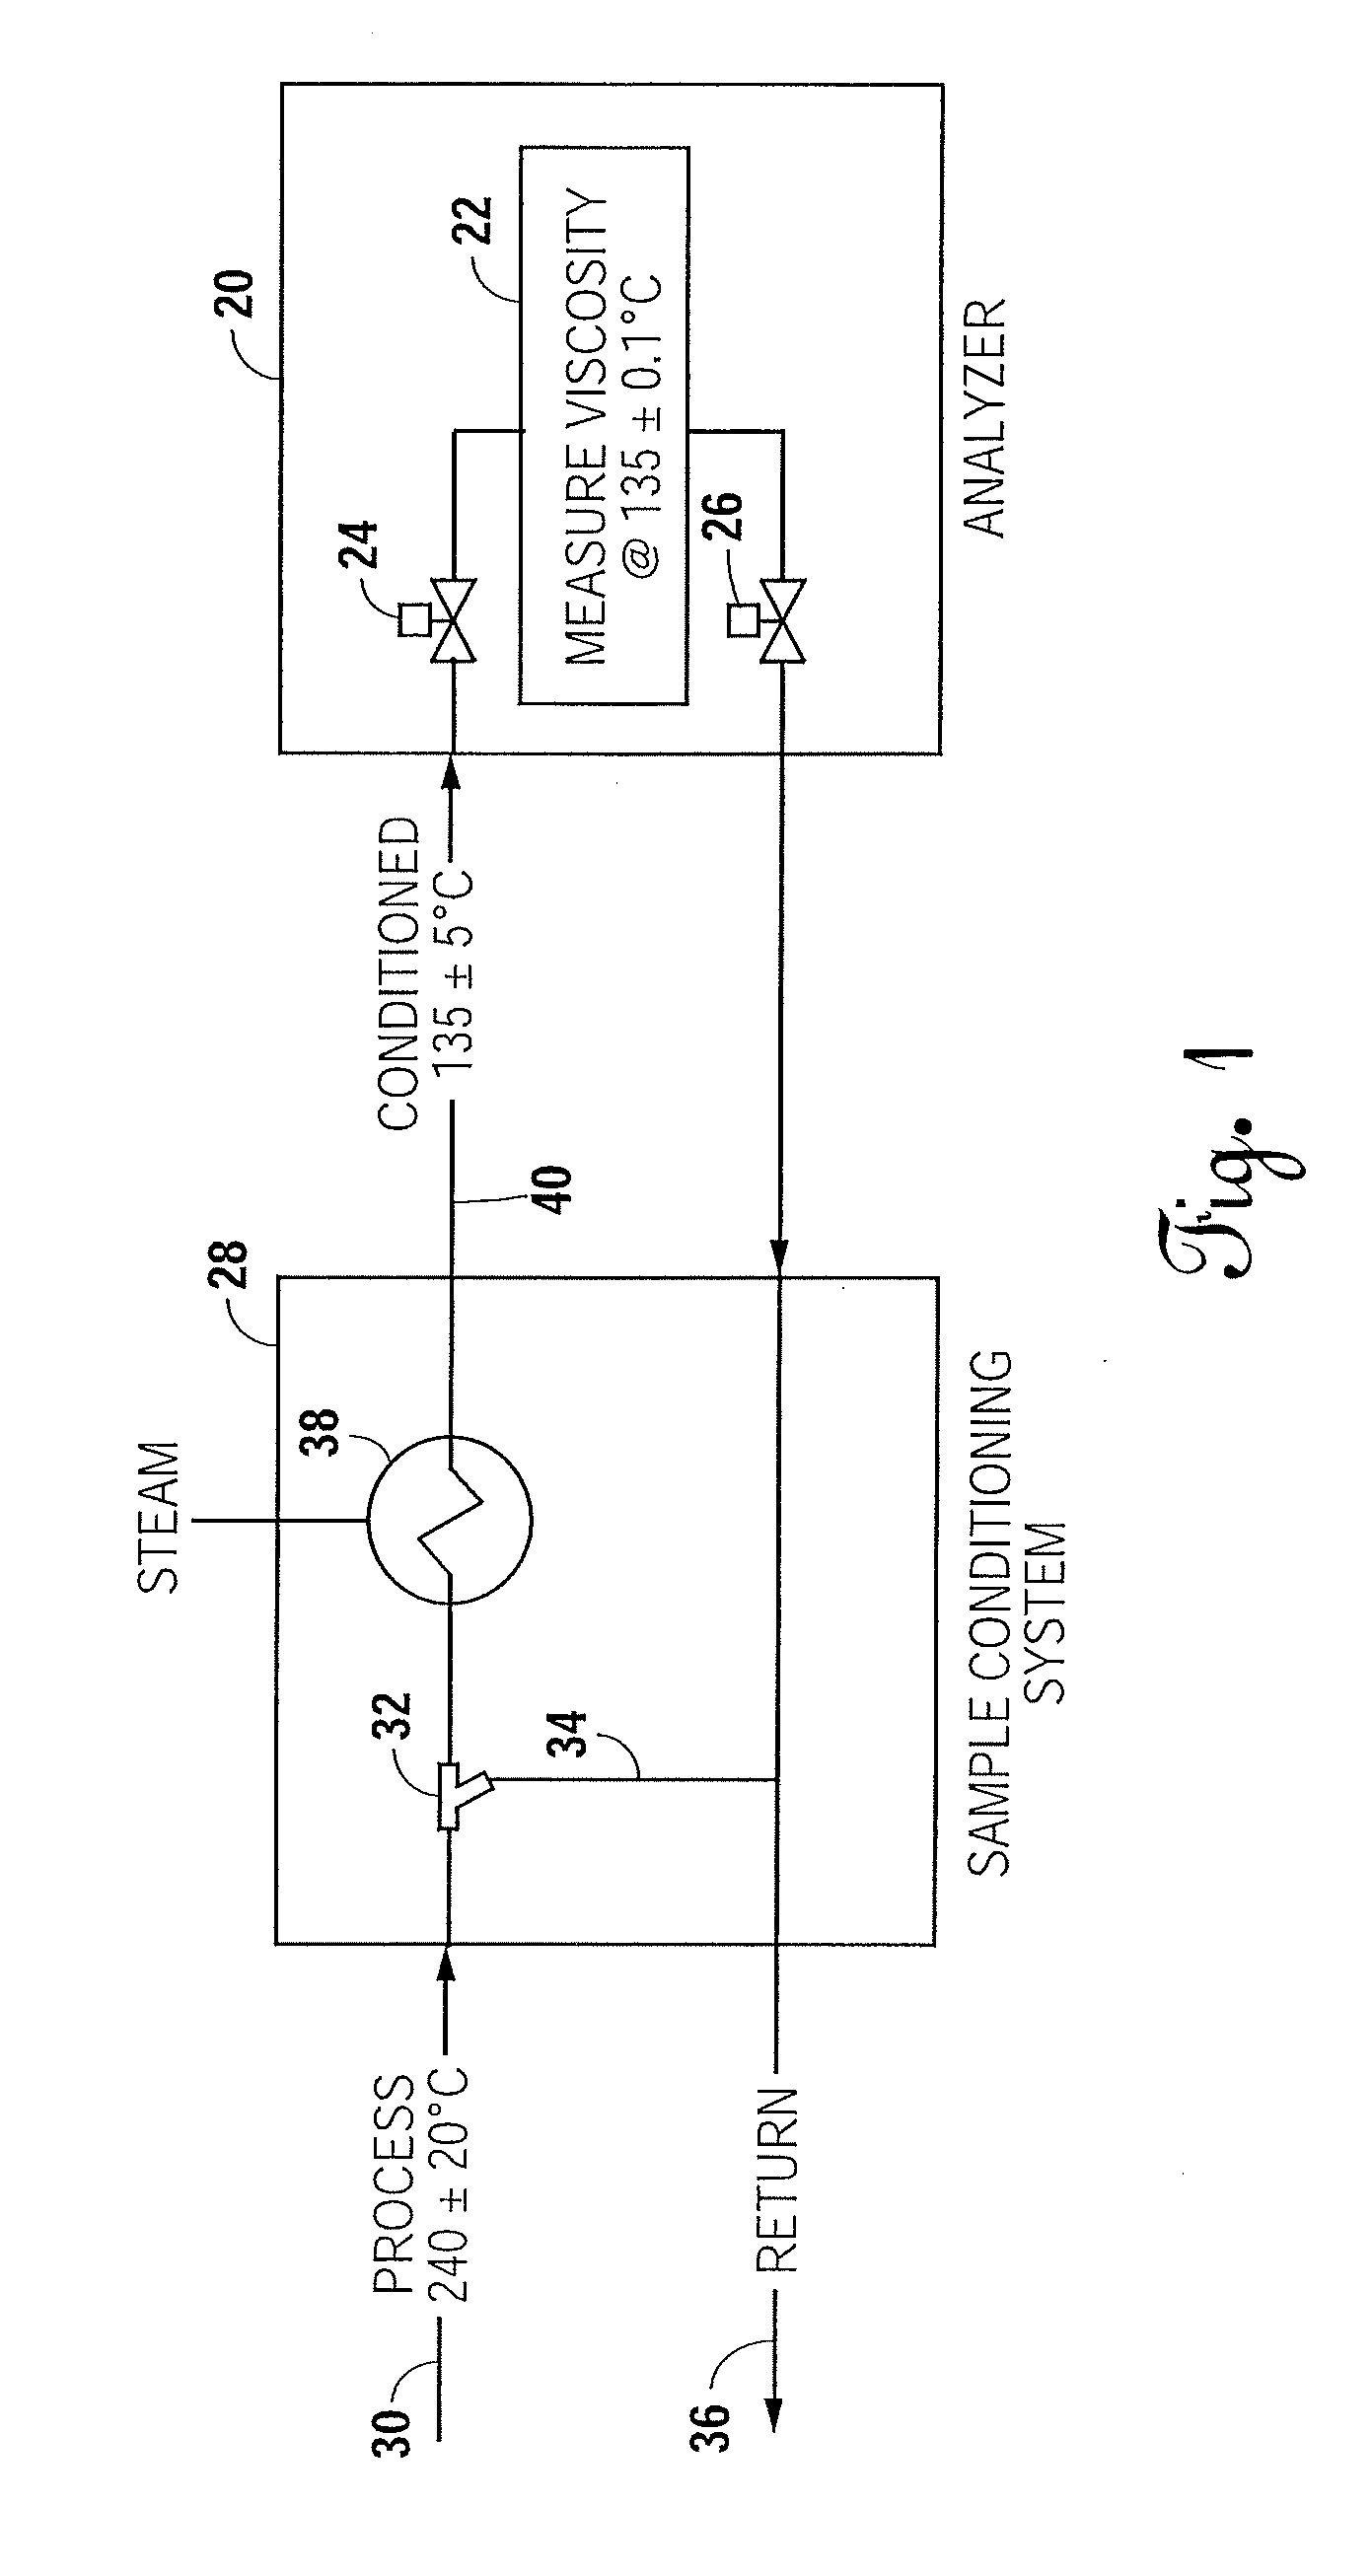 Method and apparatus for measuring characteristics of a heated fluid in a hostile environment